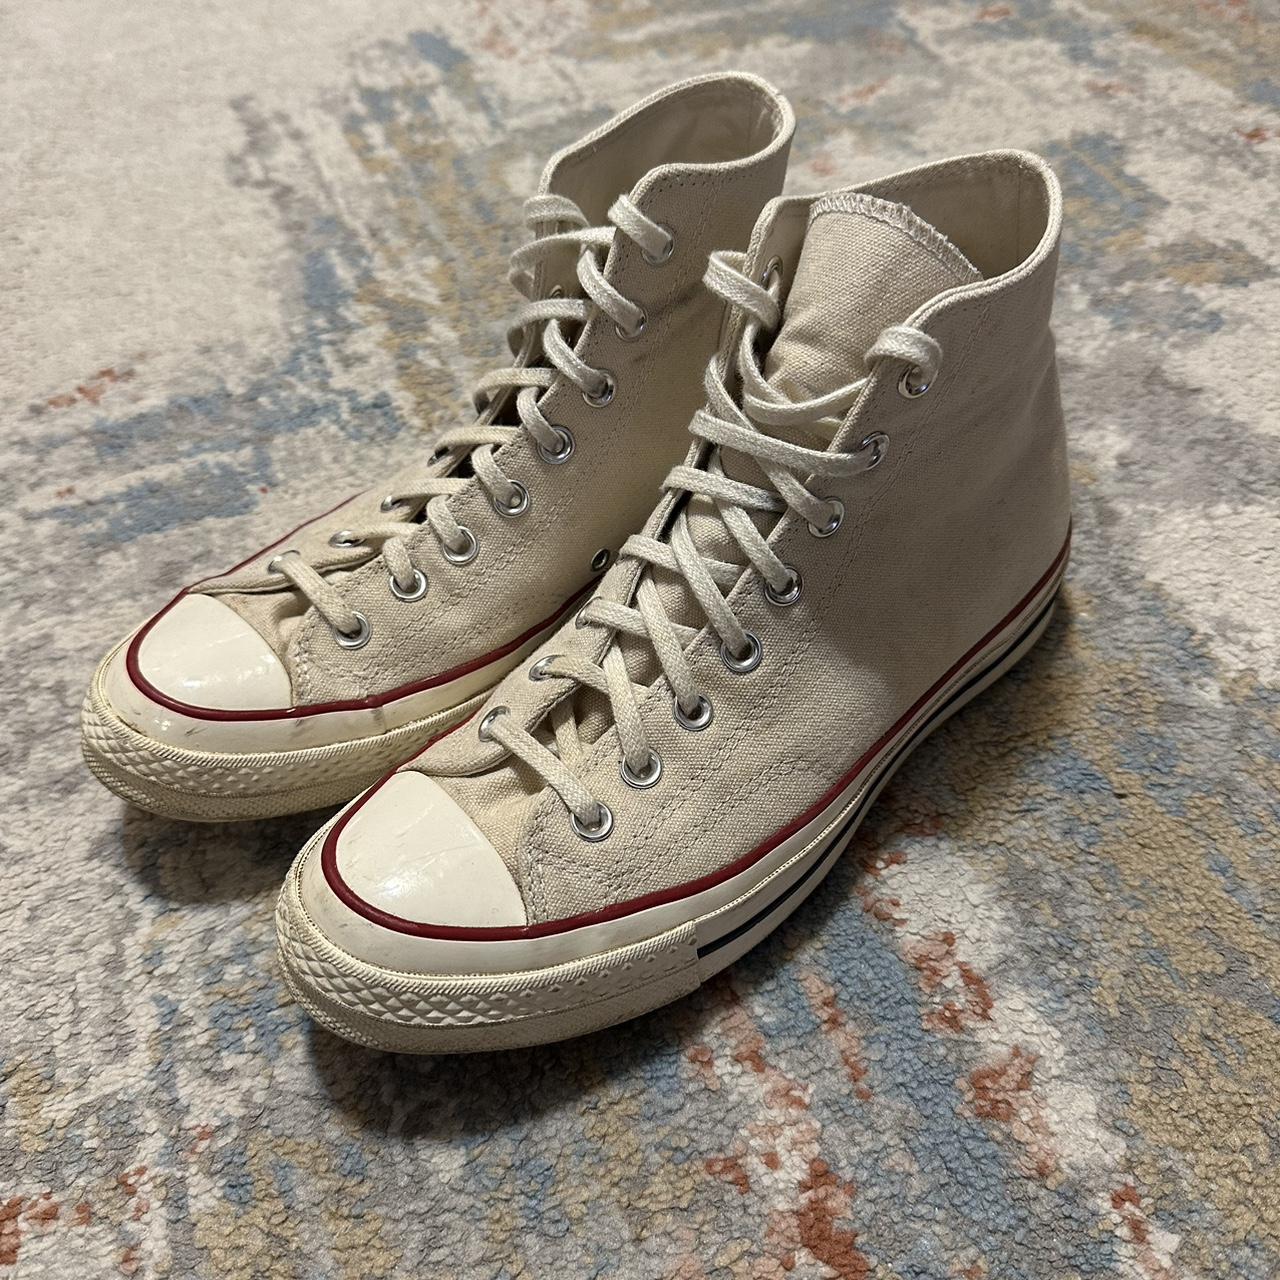 Converse All Star 70s High Tops in... - Depop